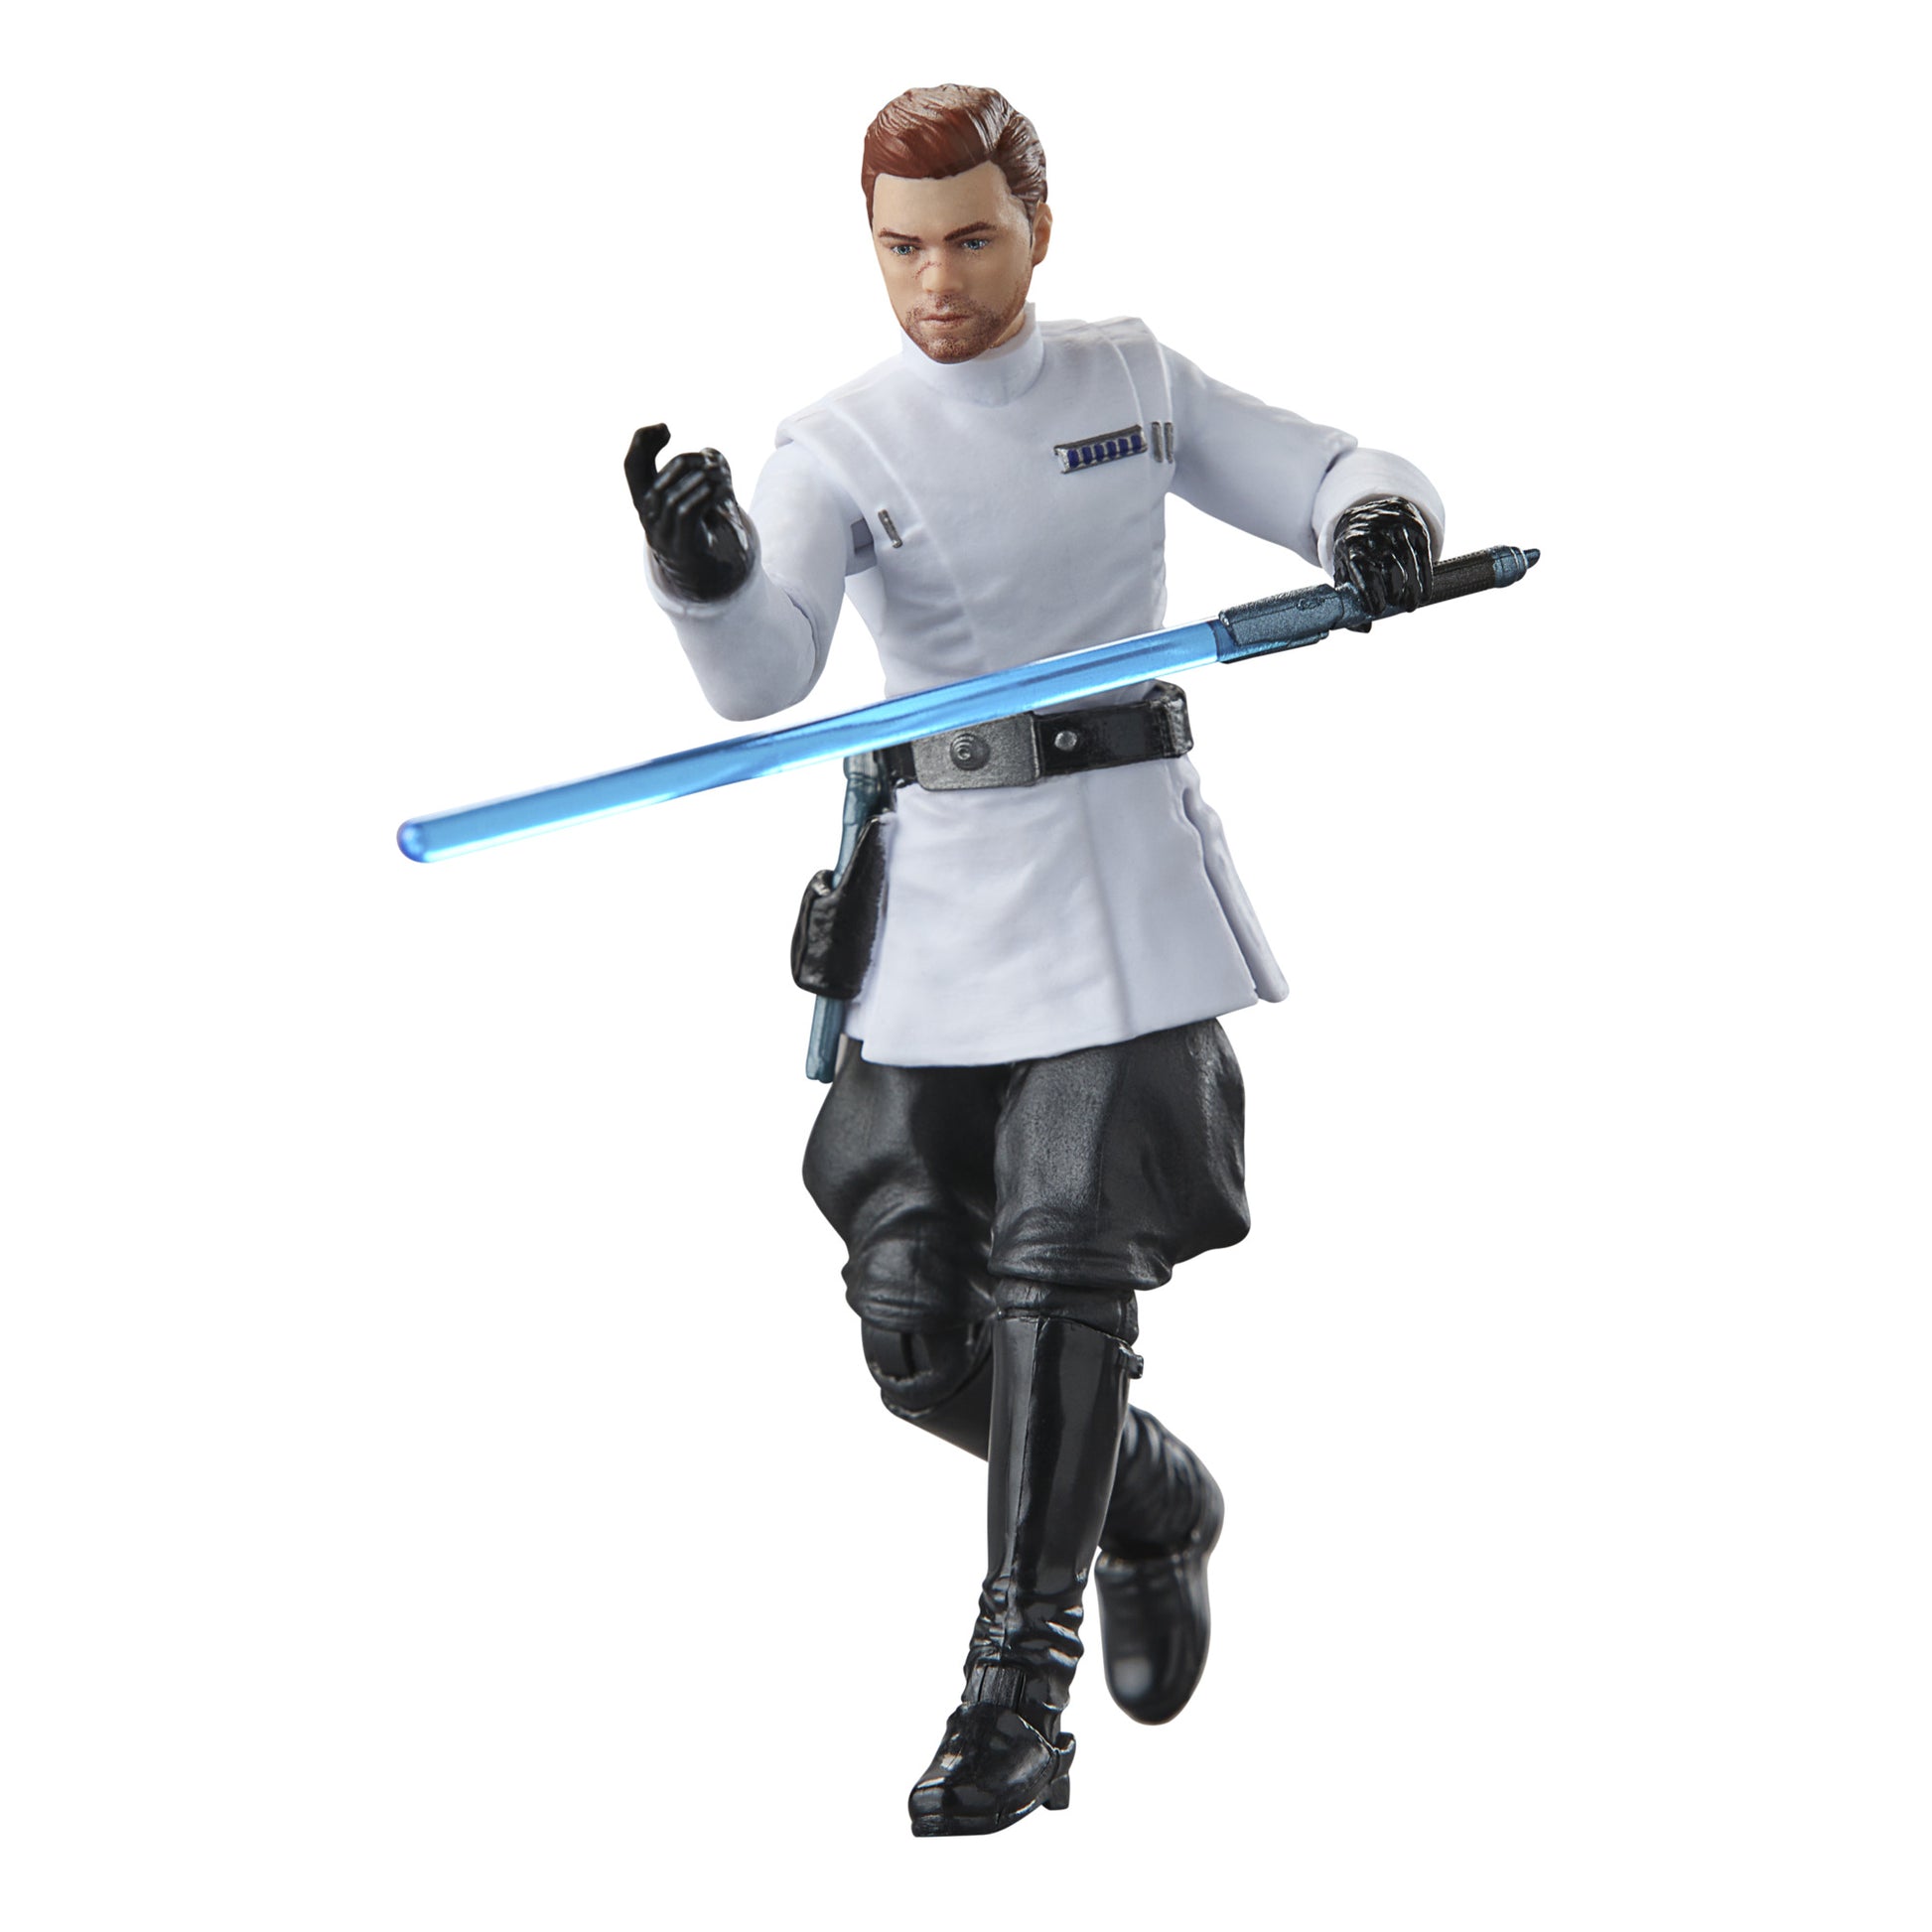 Star Wars The Vintage Collection Cal Kestis (Imperial Officer Disguise), Star Wars Jedi: Survivor 3.75 Inch Collectible Action Figure